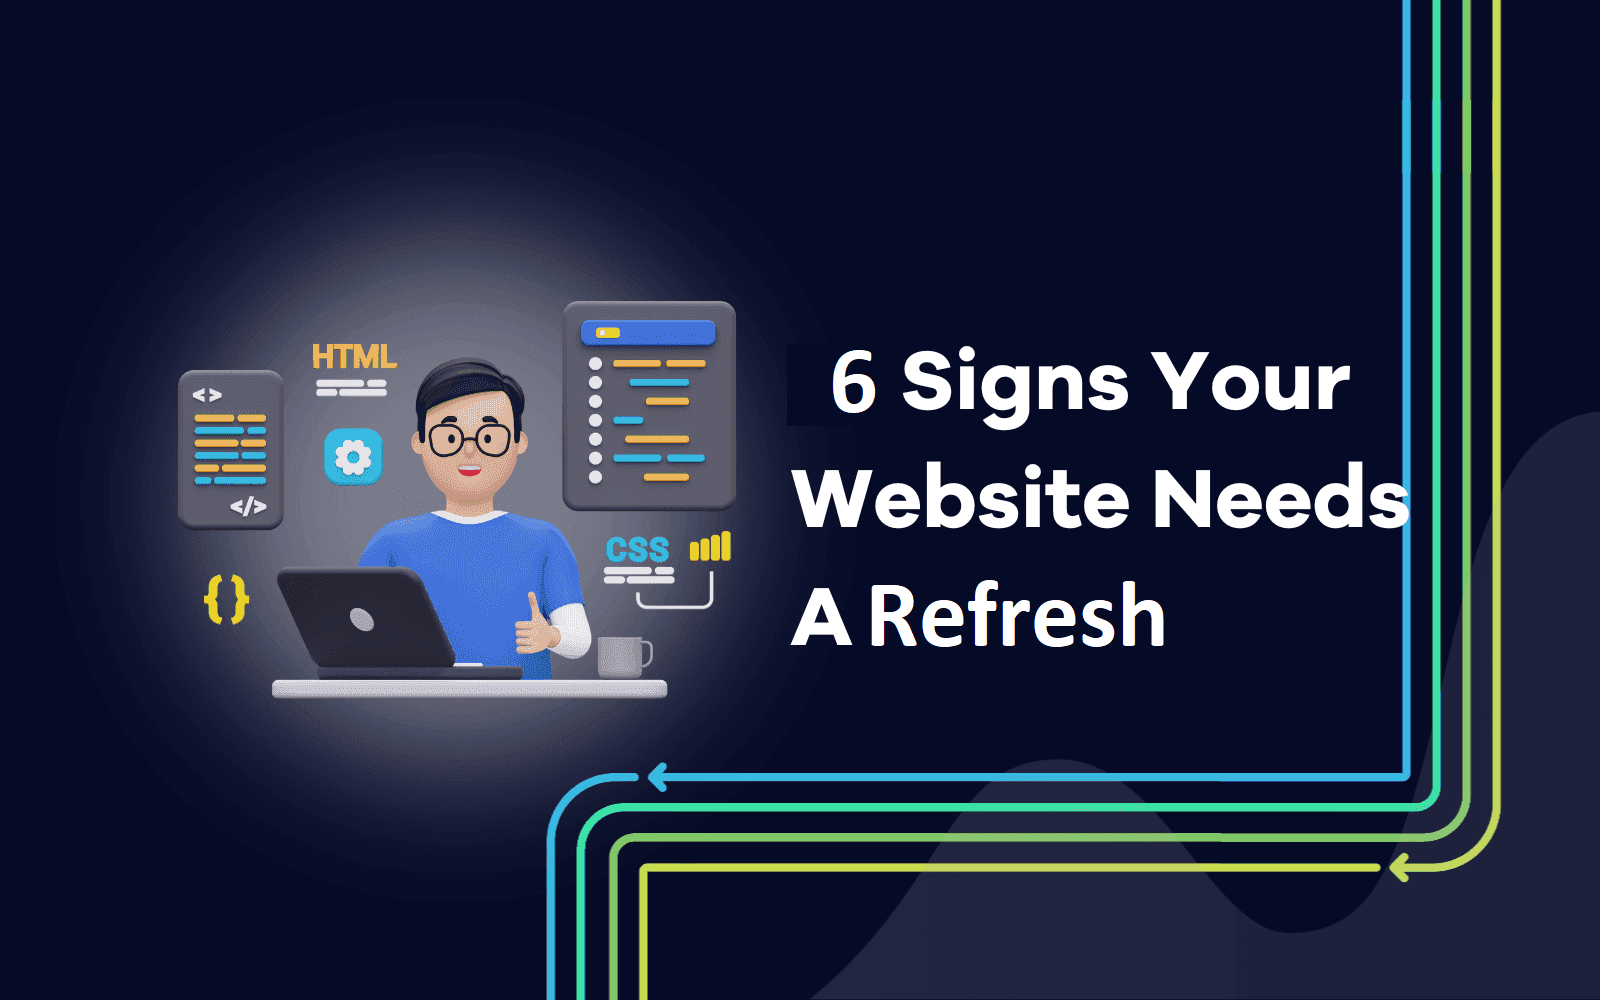 6 Signs Your Website Needs a Refresh